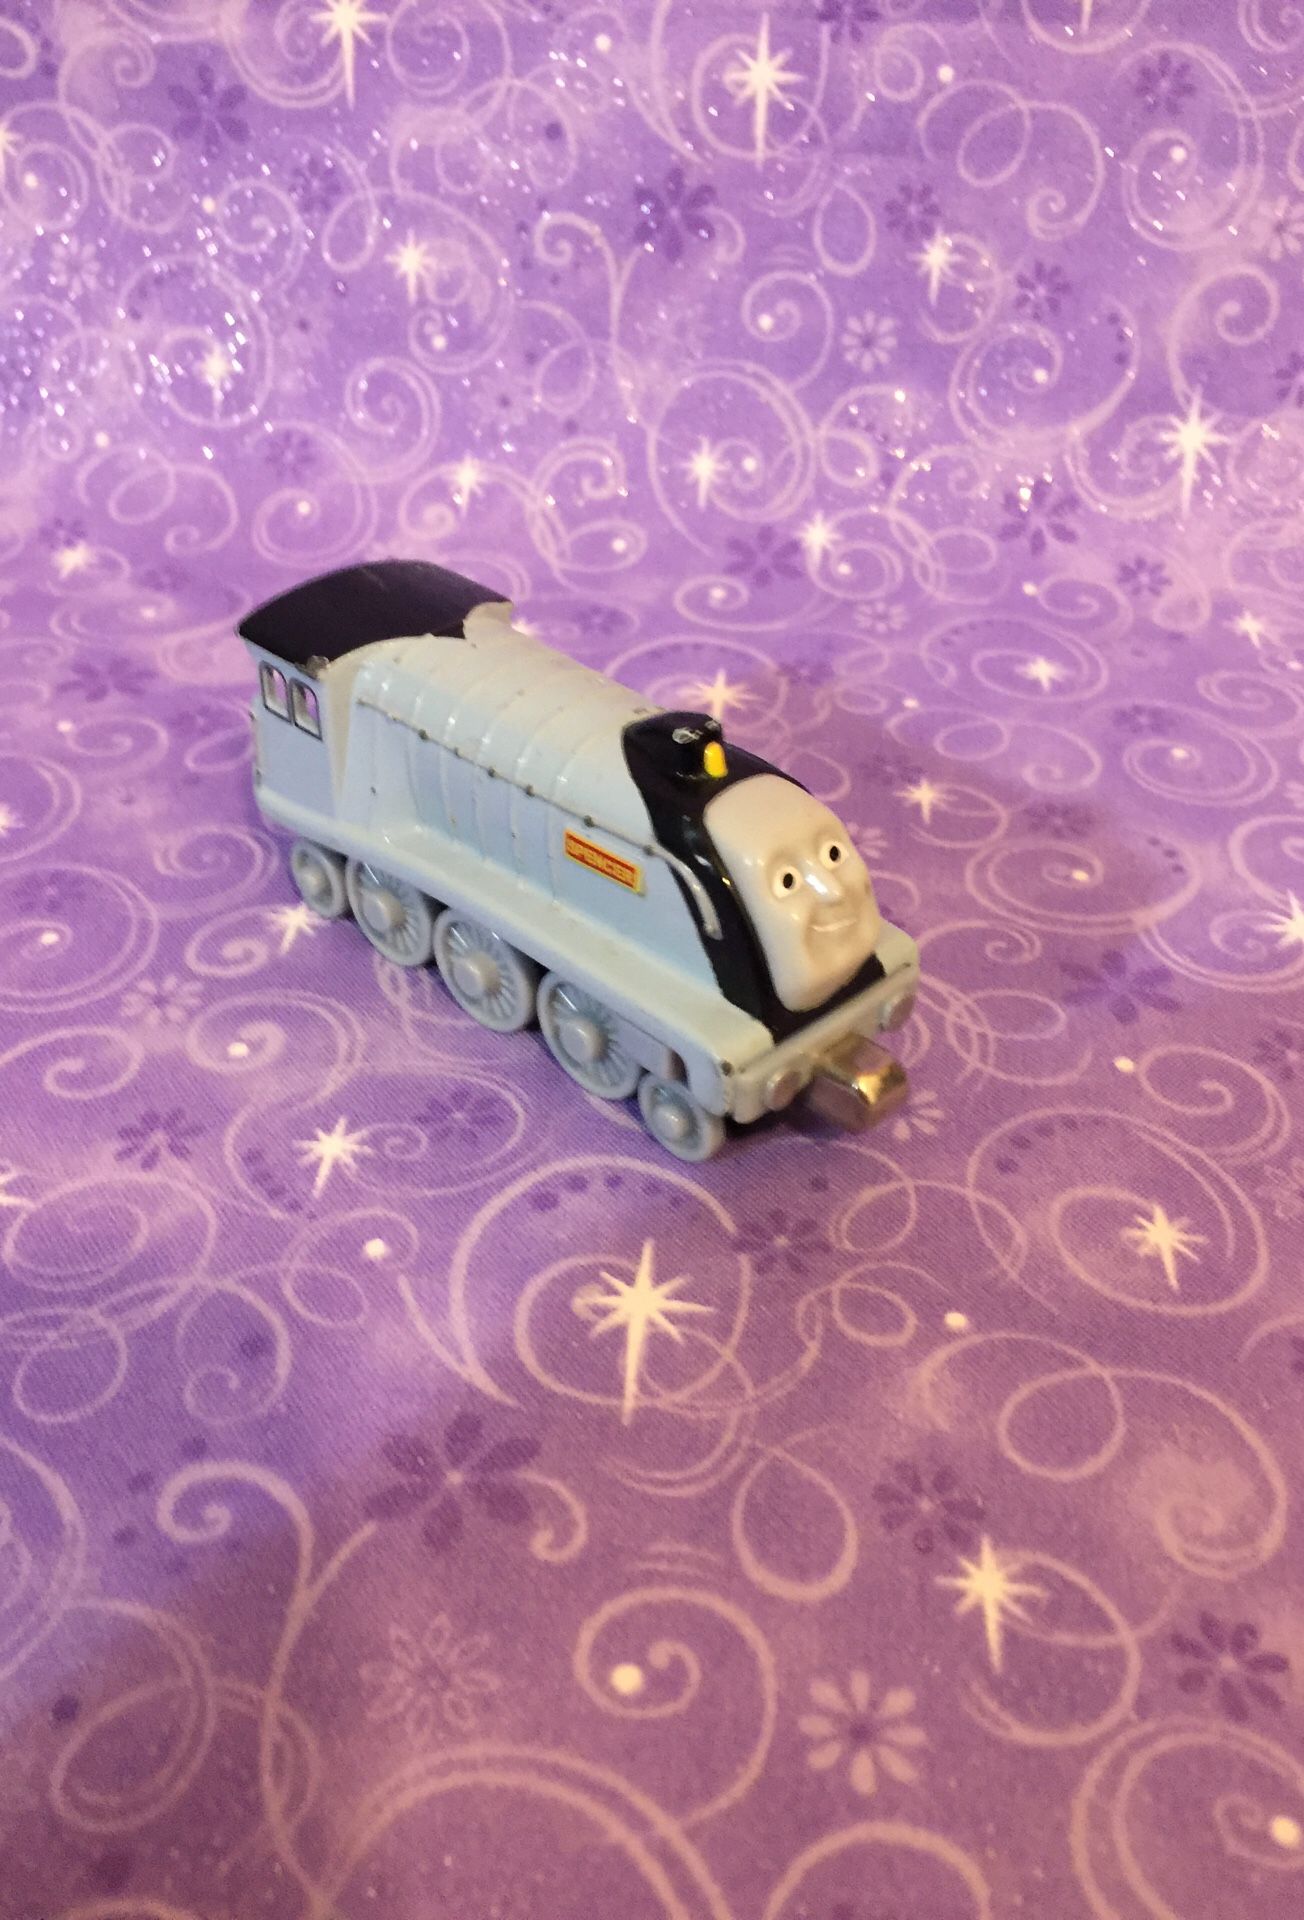 Thomas and friends - Spencer